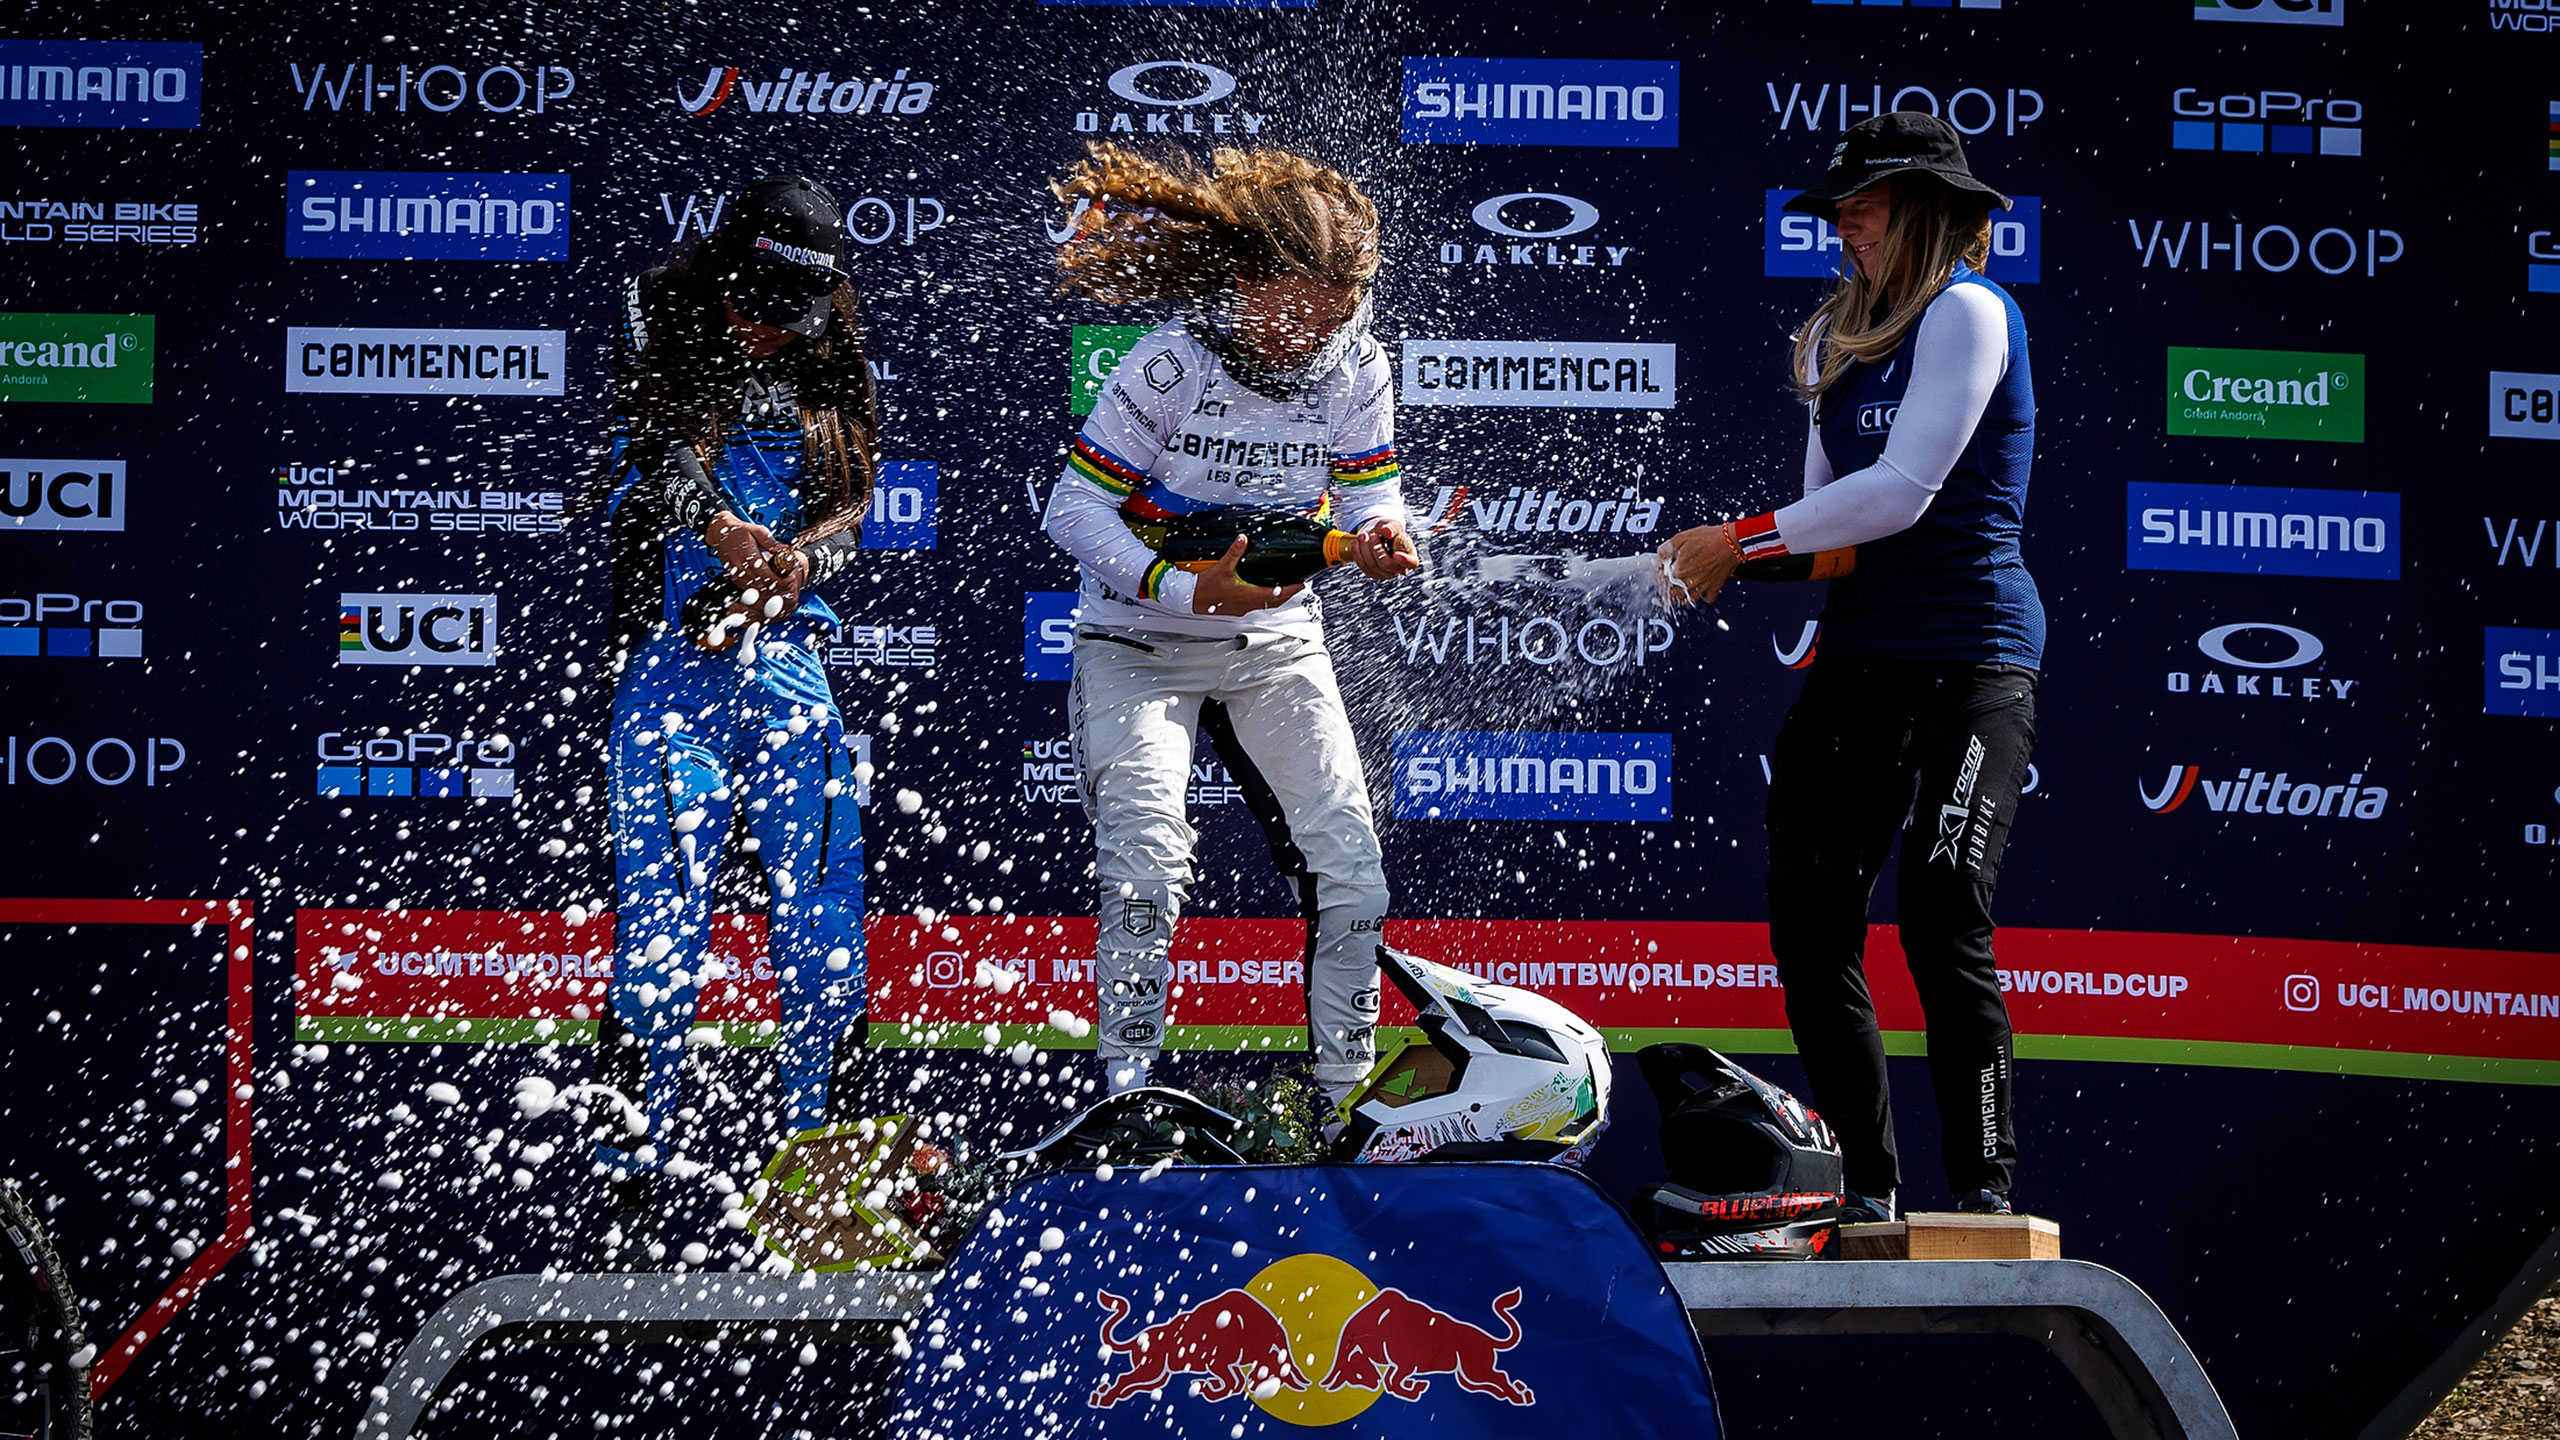 Andorra podium with champagne shower